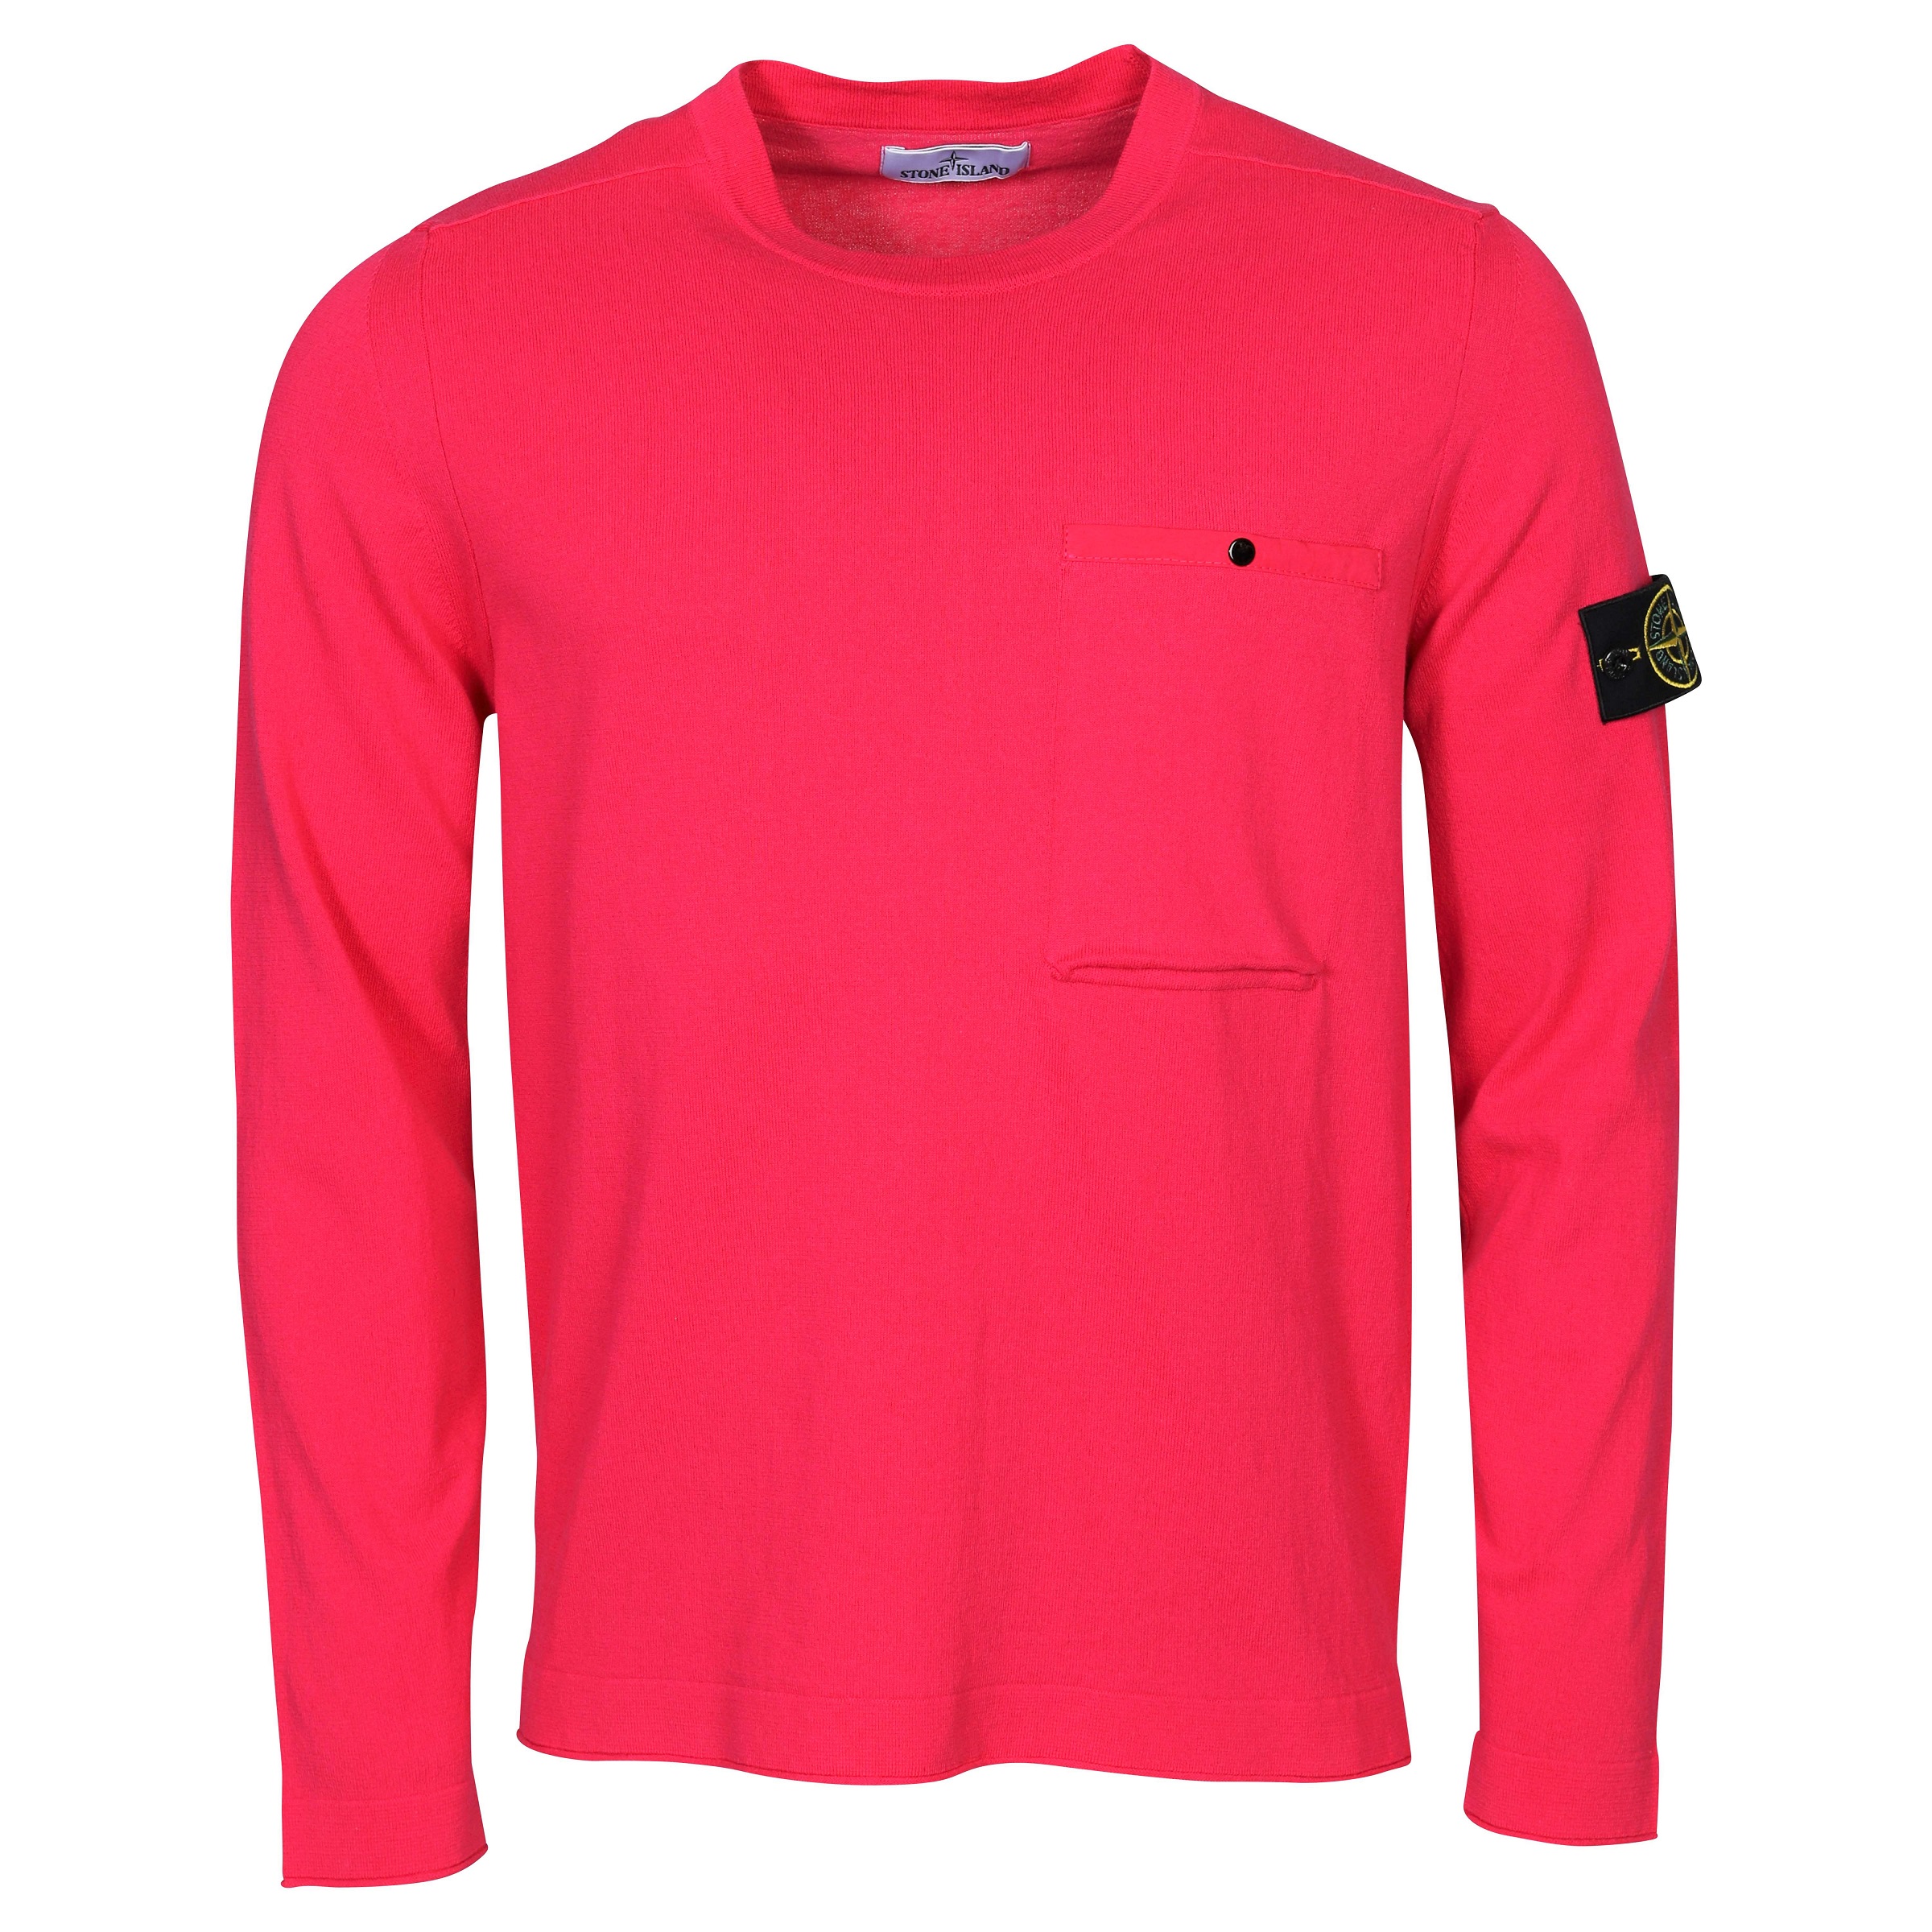 Stone Island Chest Pocket Knit Sweater in Pink L